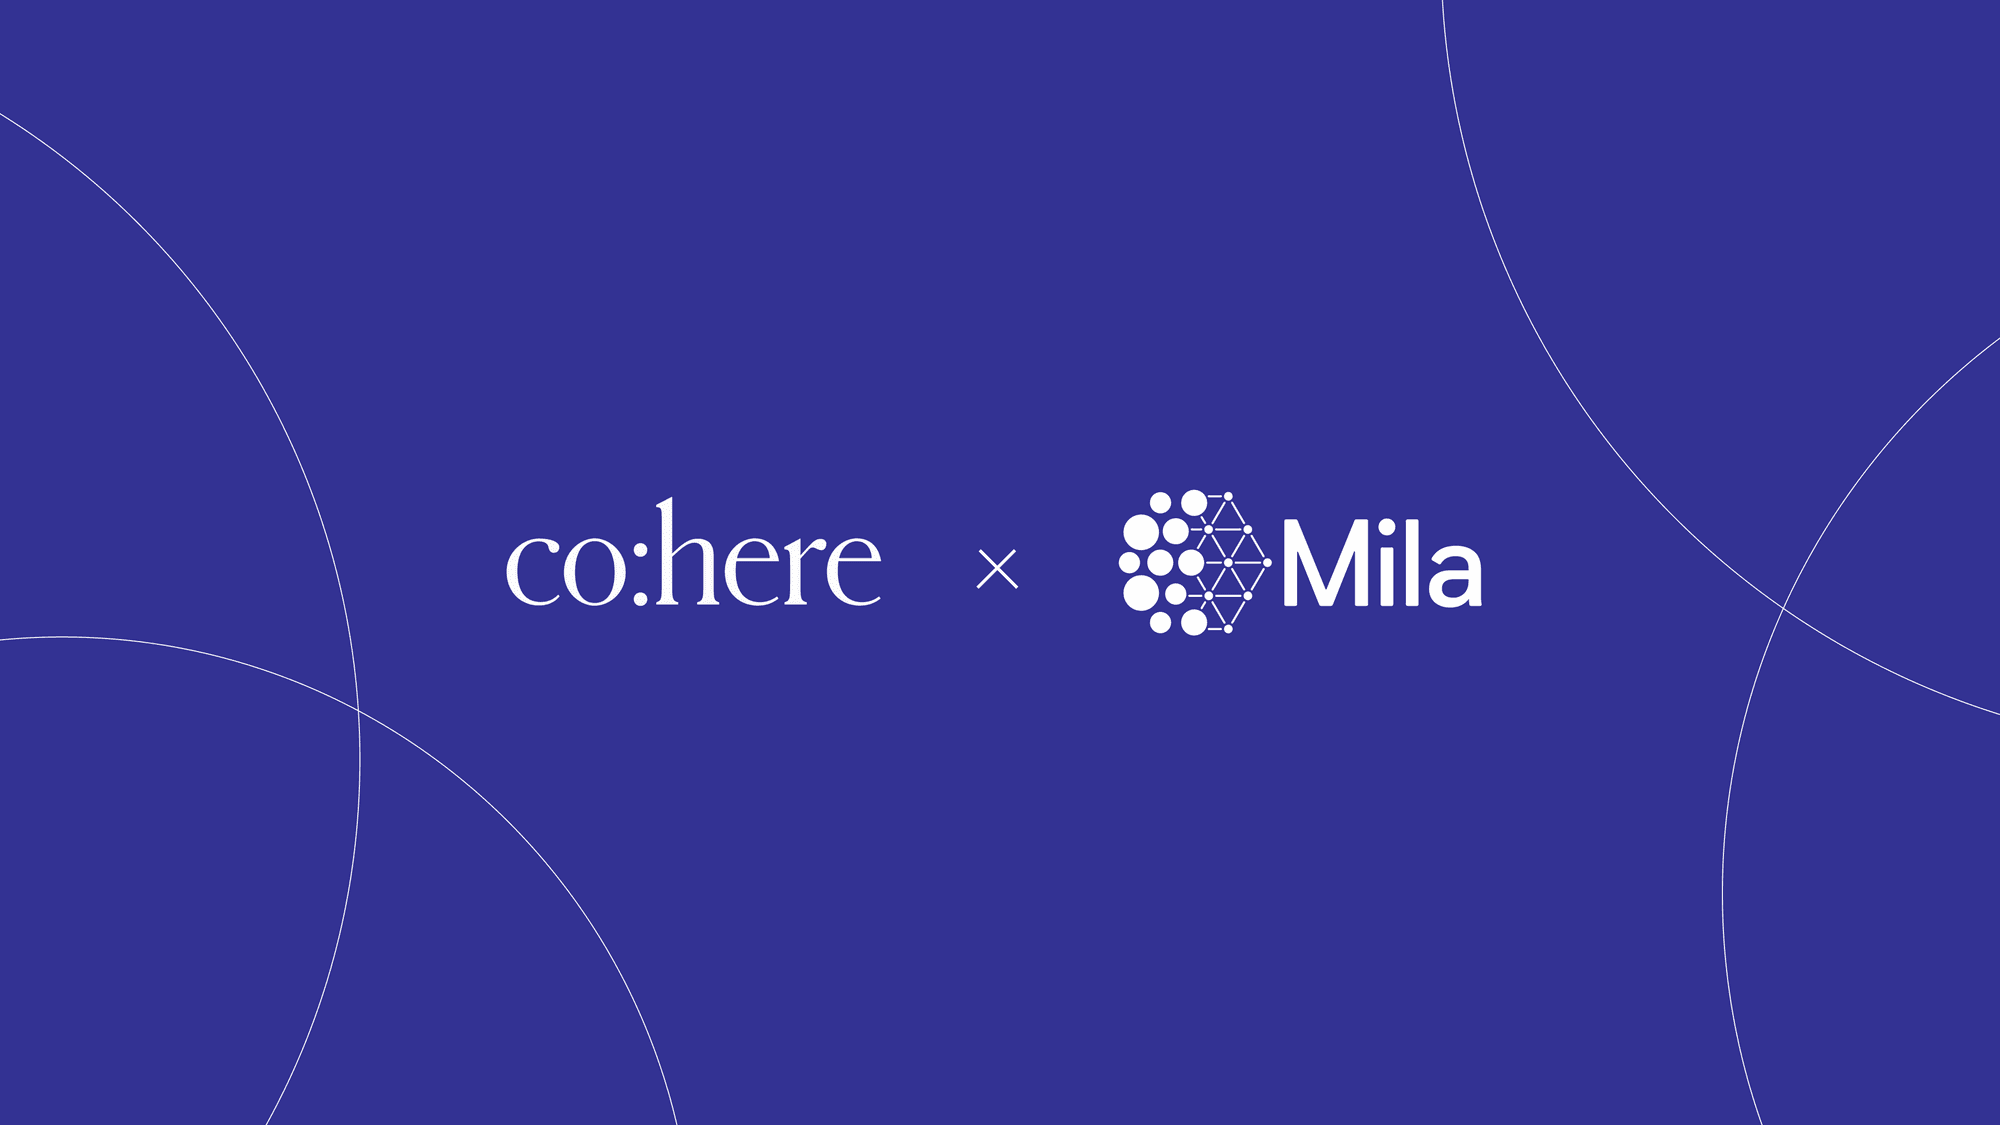 Cohere Partners with Mila to Accelerate the Advancement of NLP Research